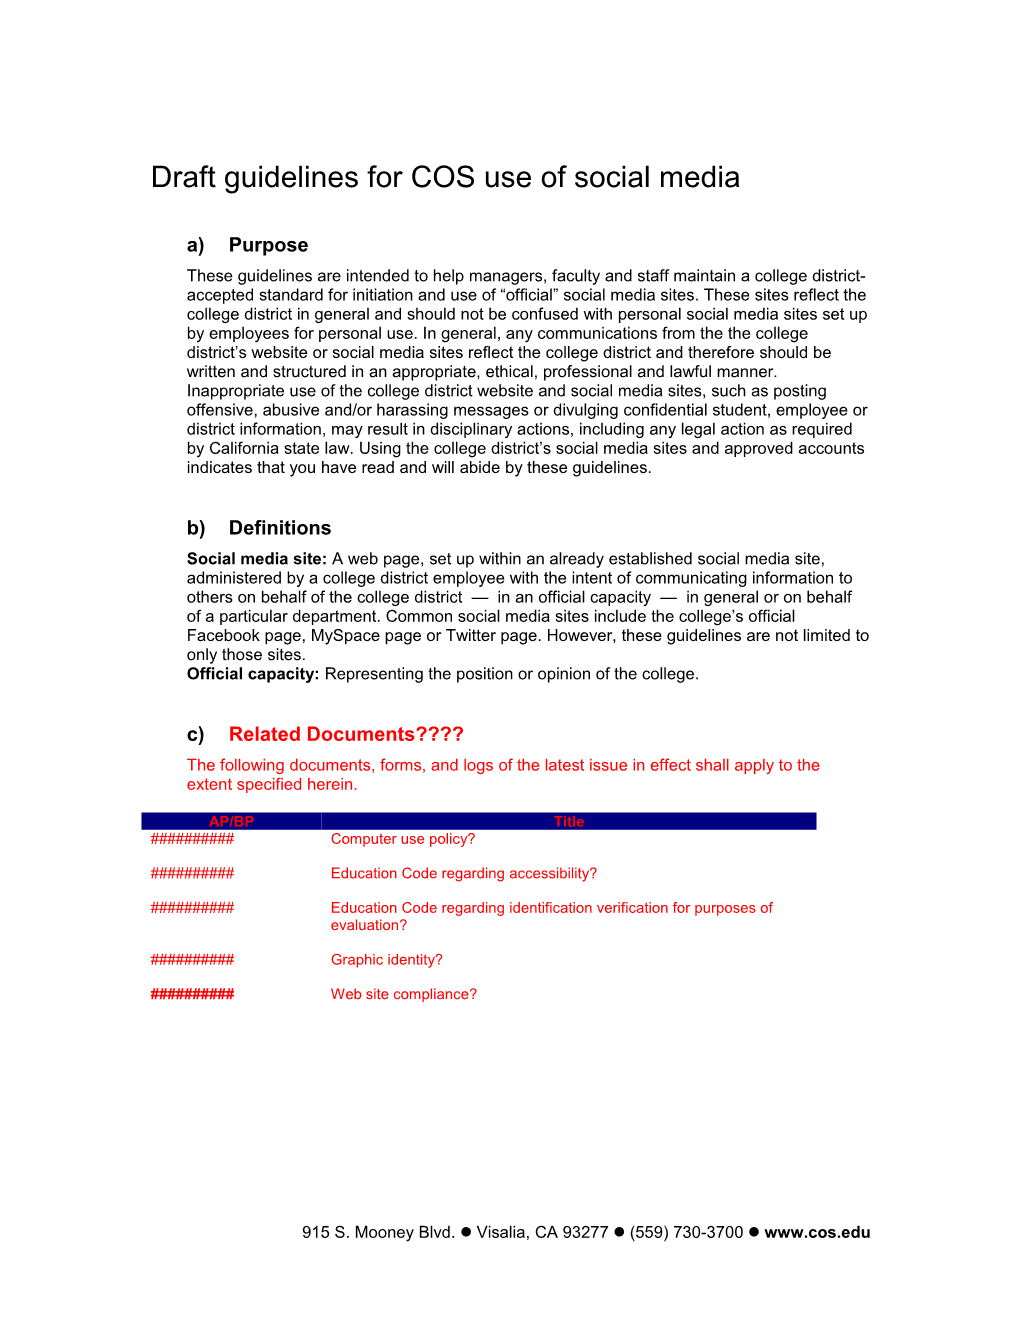 Draft Guidelines for COS Use of Social Media